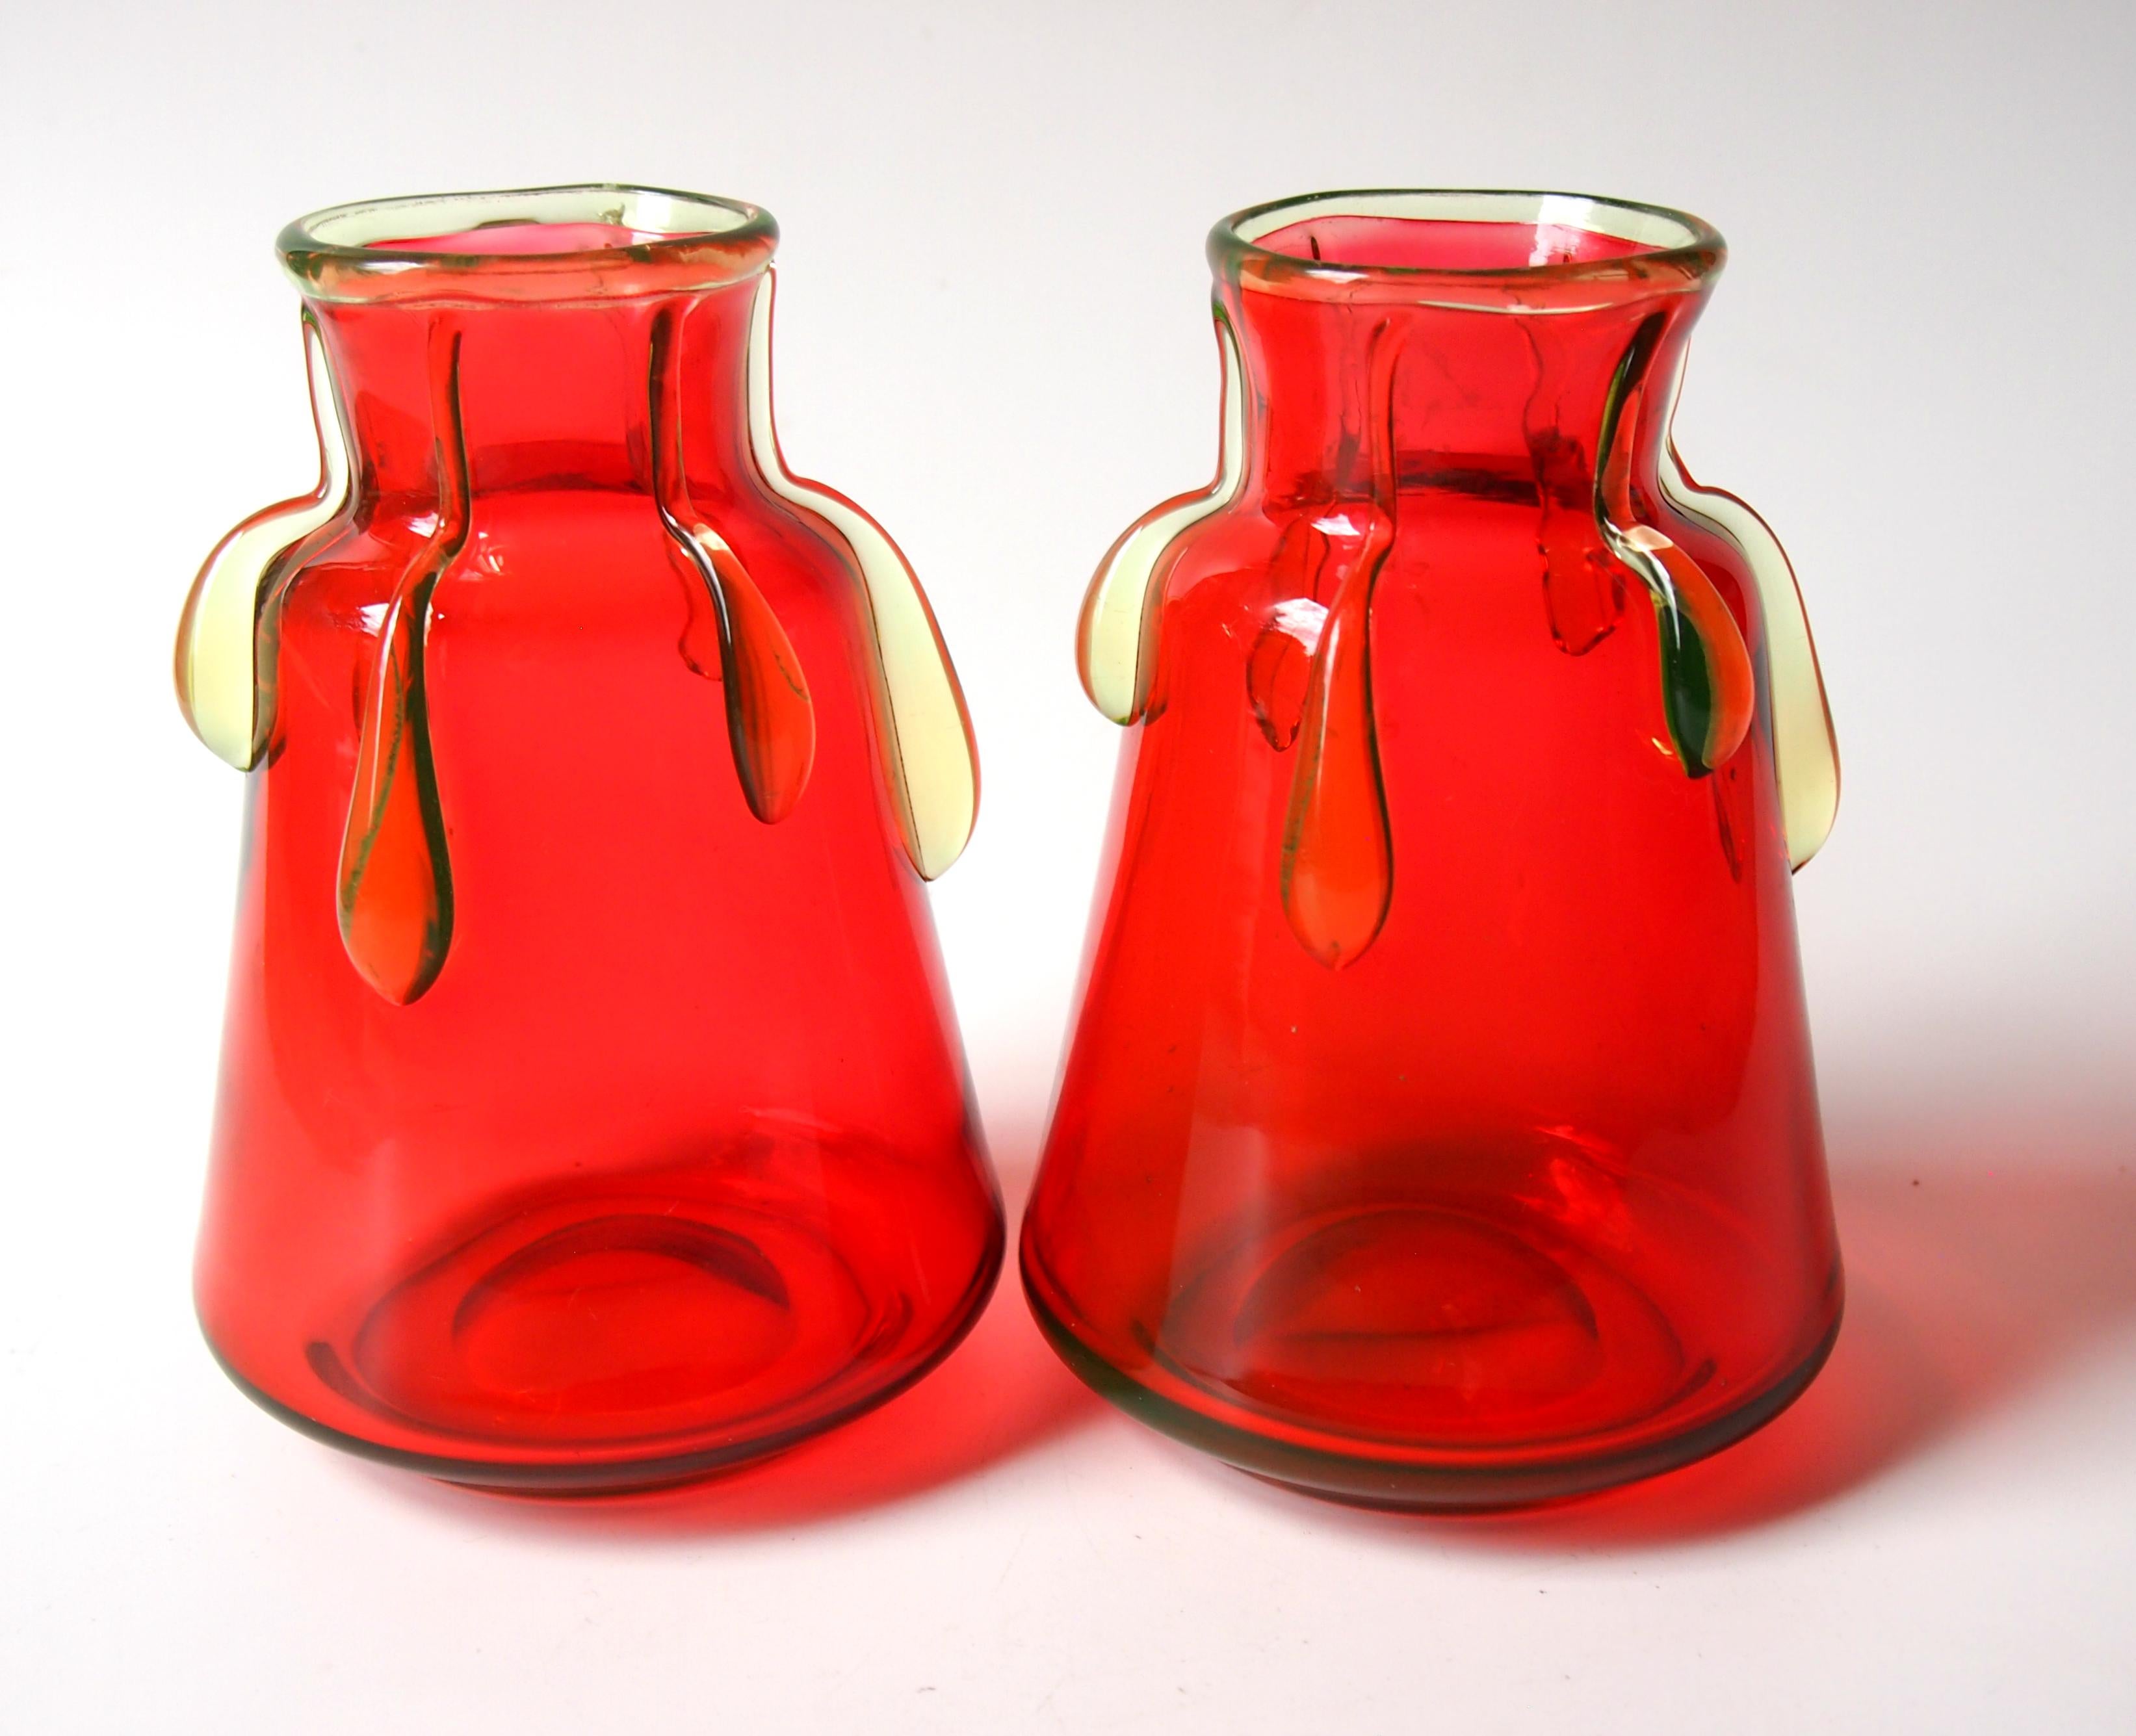 Super pair of Harrach orange-red vases with hot applied uranium glass drips in the late Victorian style.

Harrach has been the backbone of Bohemian, and possibly European, glass for the last 300 years. It proudly celebrates its tri-centenary in